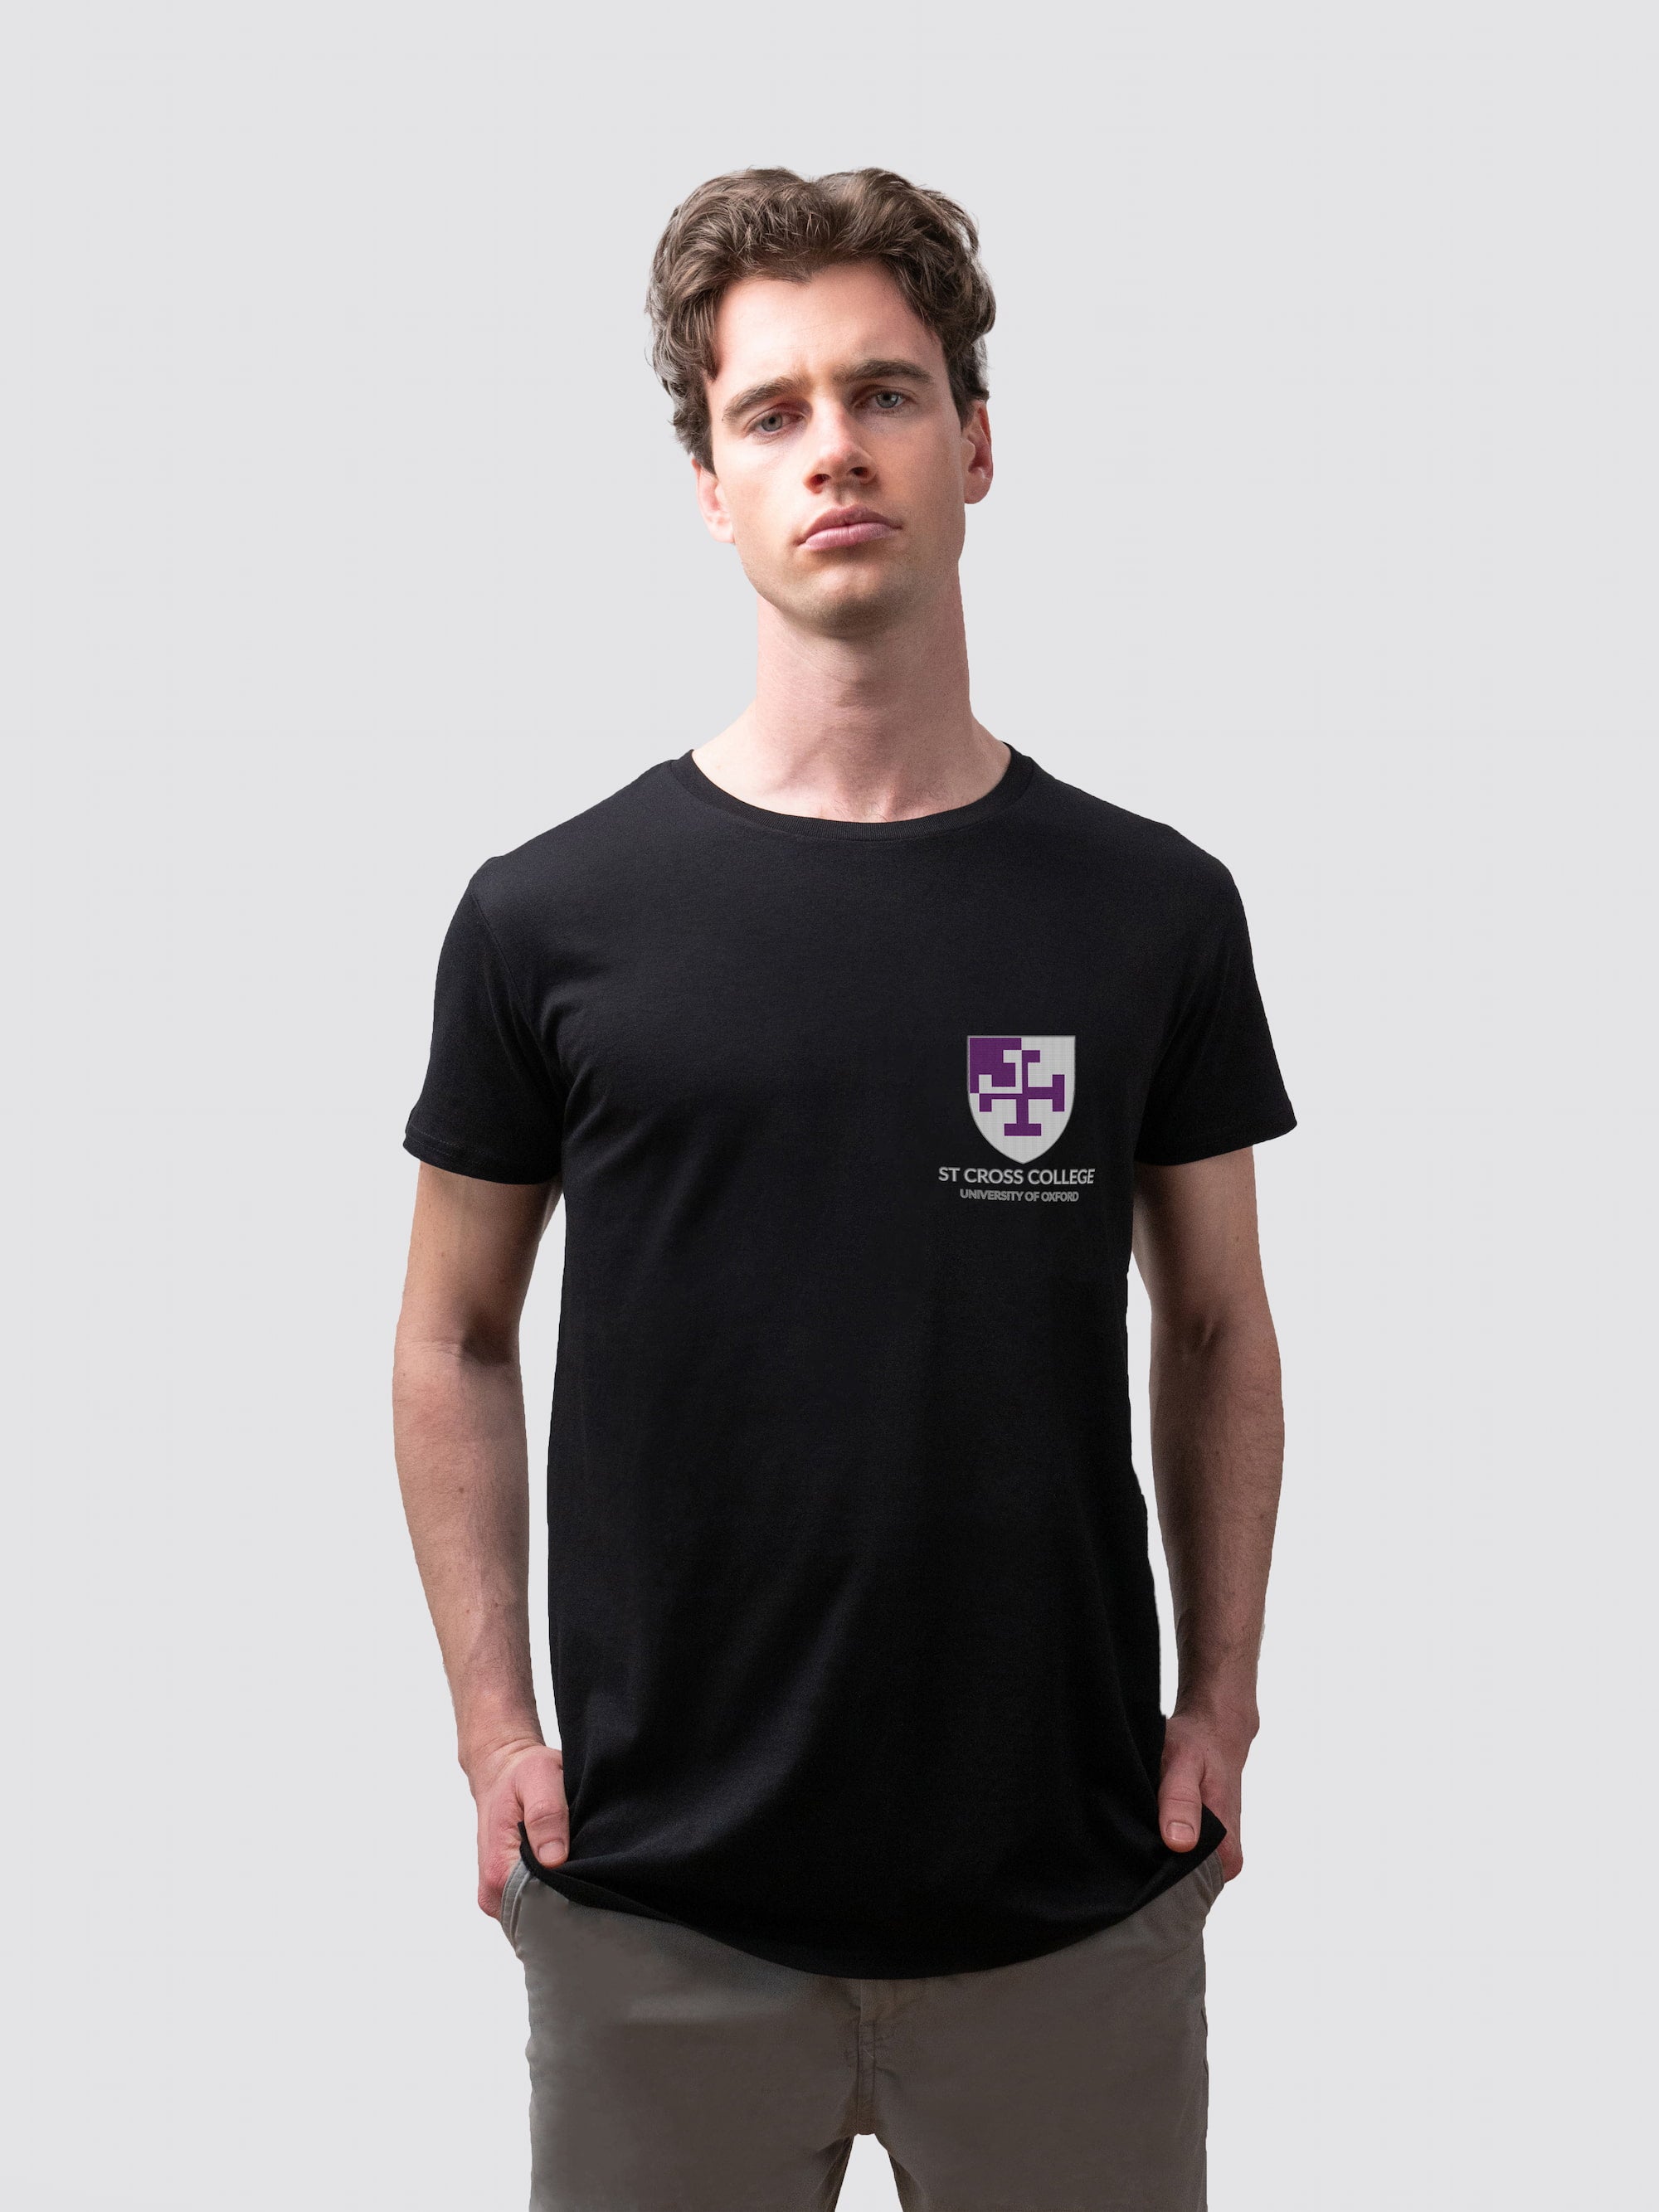 Sustainable St Cross t-shirt, made from organic cotton